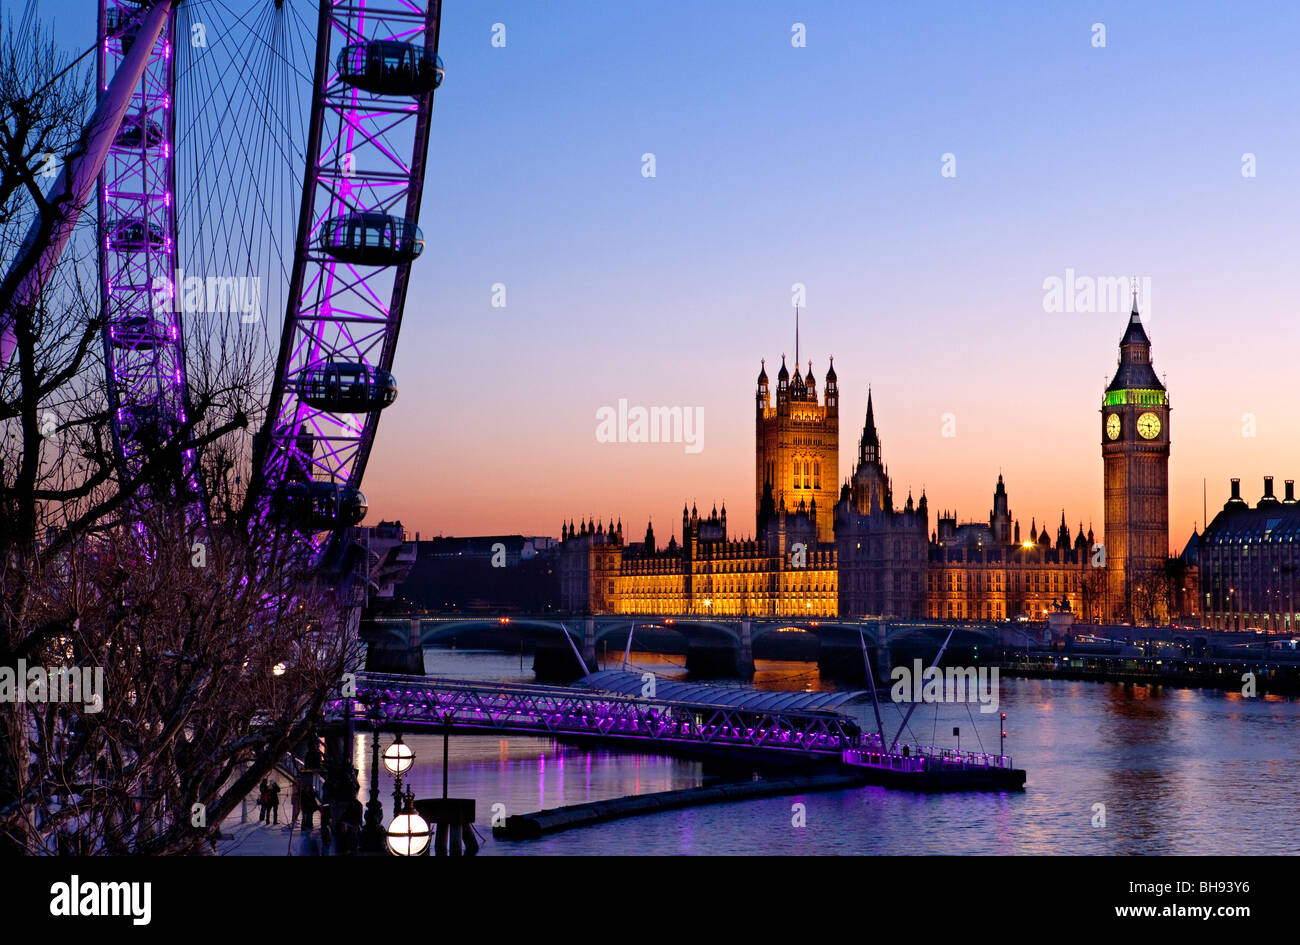 Millennium Wheel, River Thames Big Ben and the houses of parliament at night from the south bank, London, England, europe Stock Photo